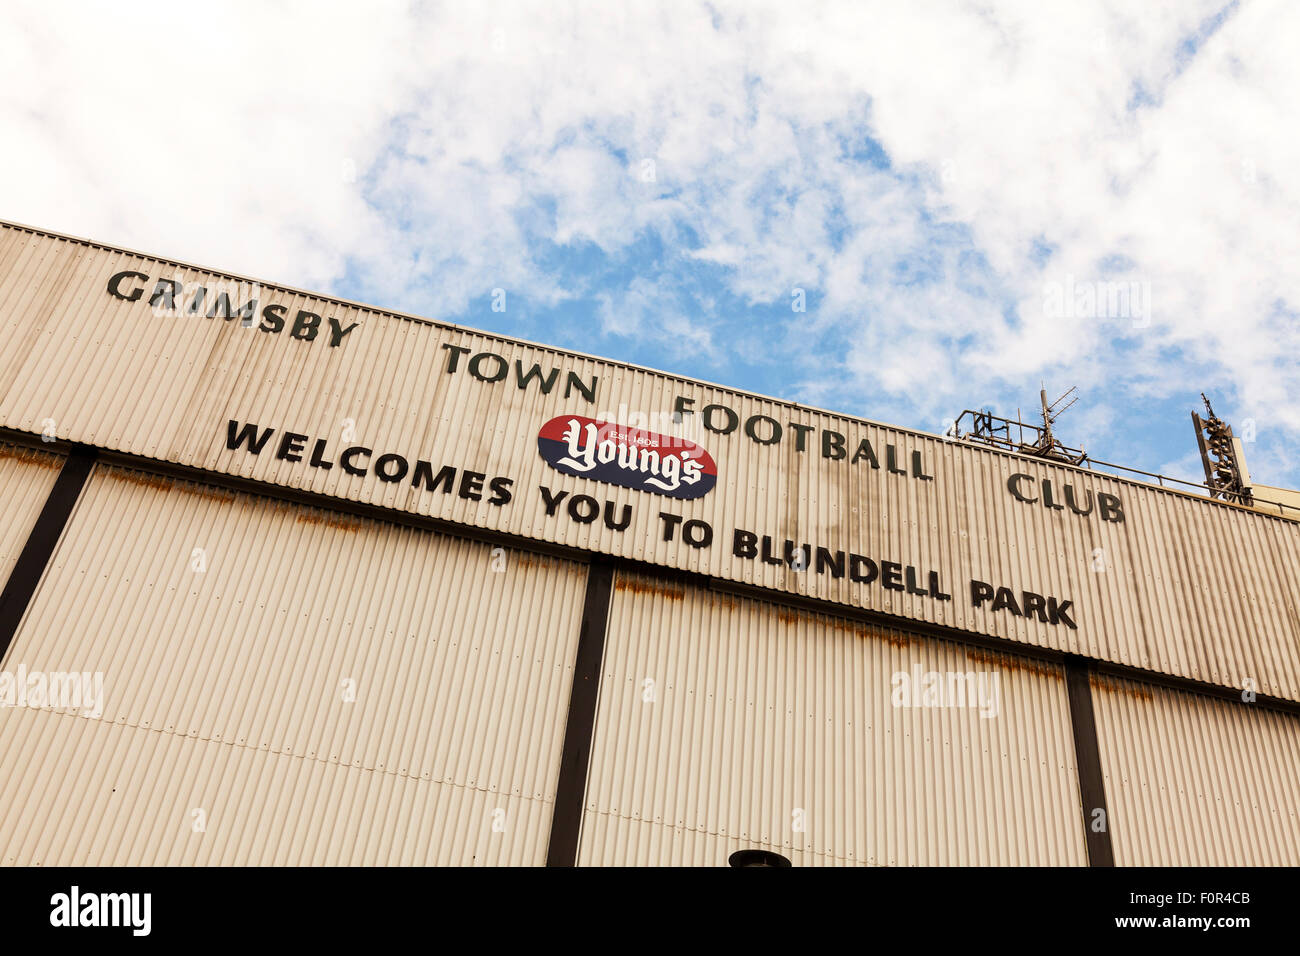 Blundell Park home of Grimsby Town FC football stadium front entrance outside facade exterior Stock Photo